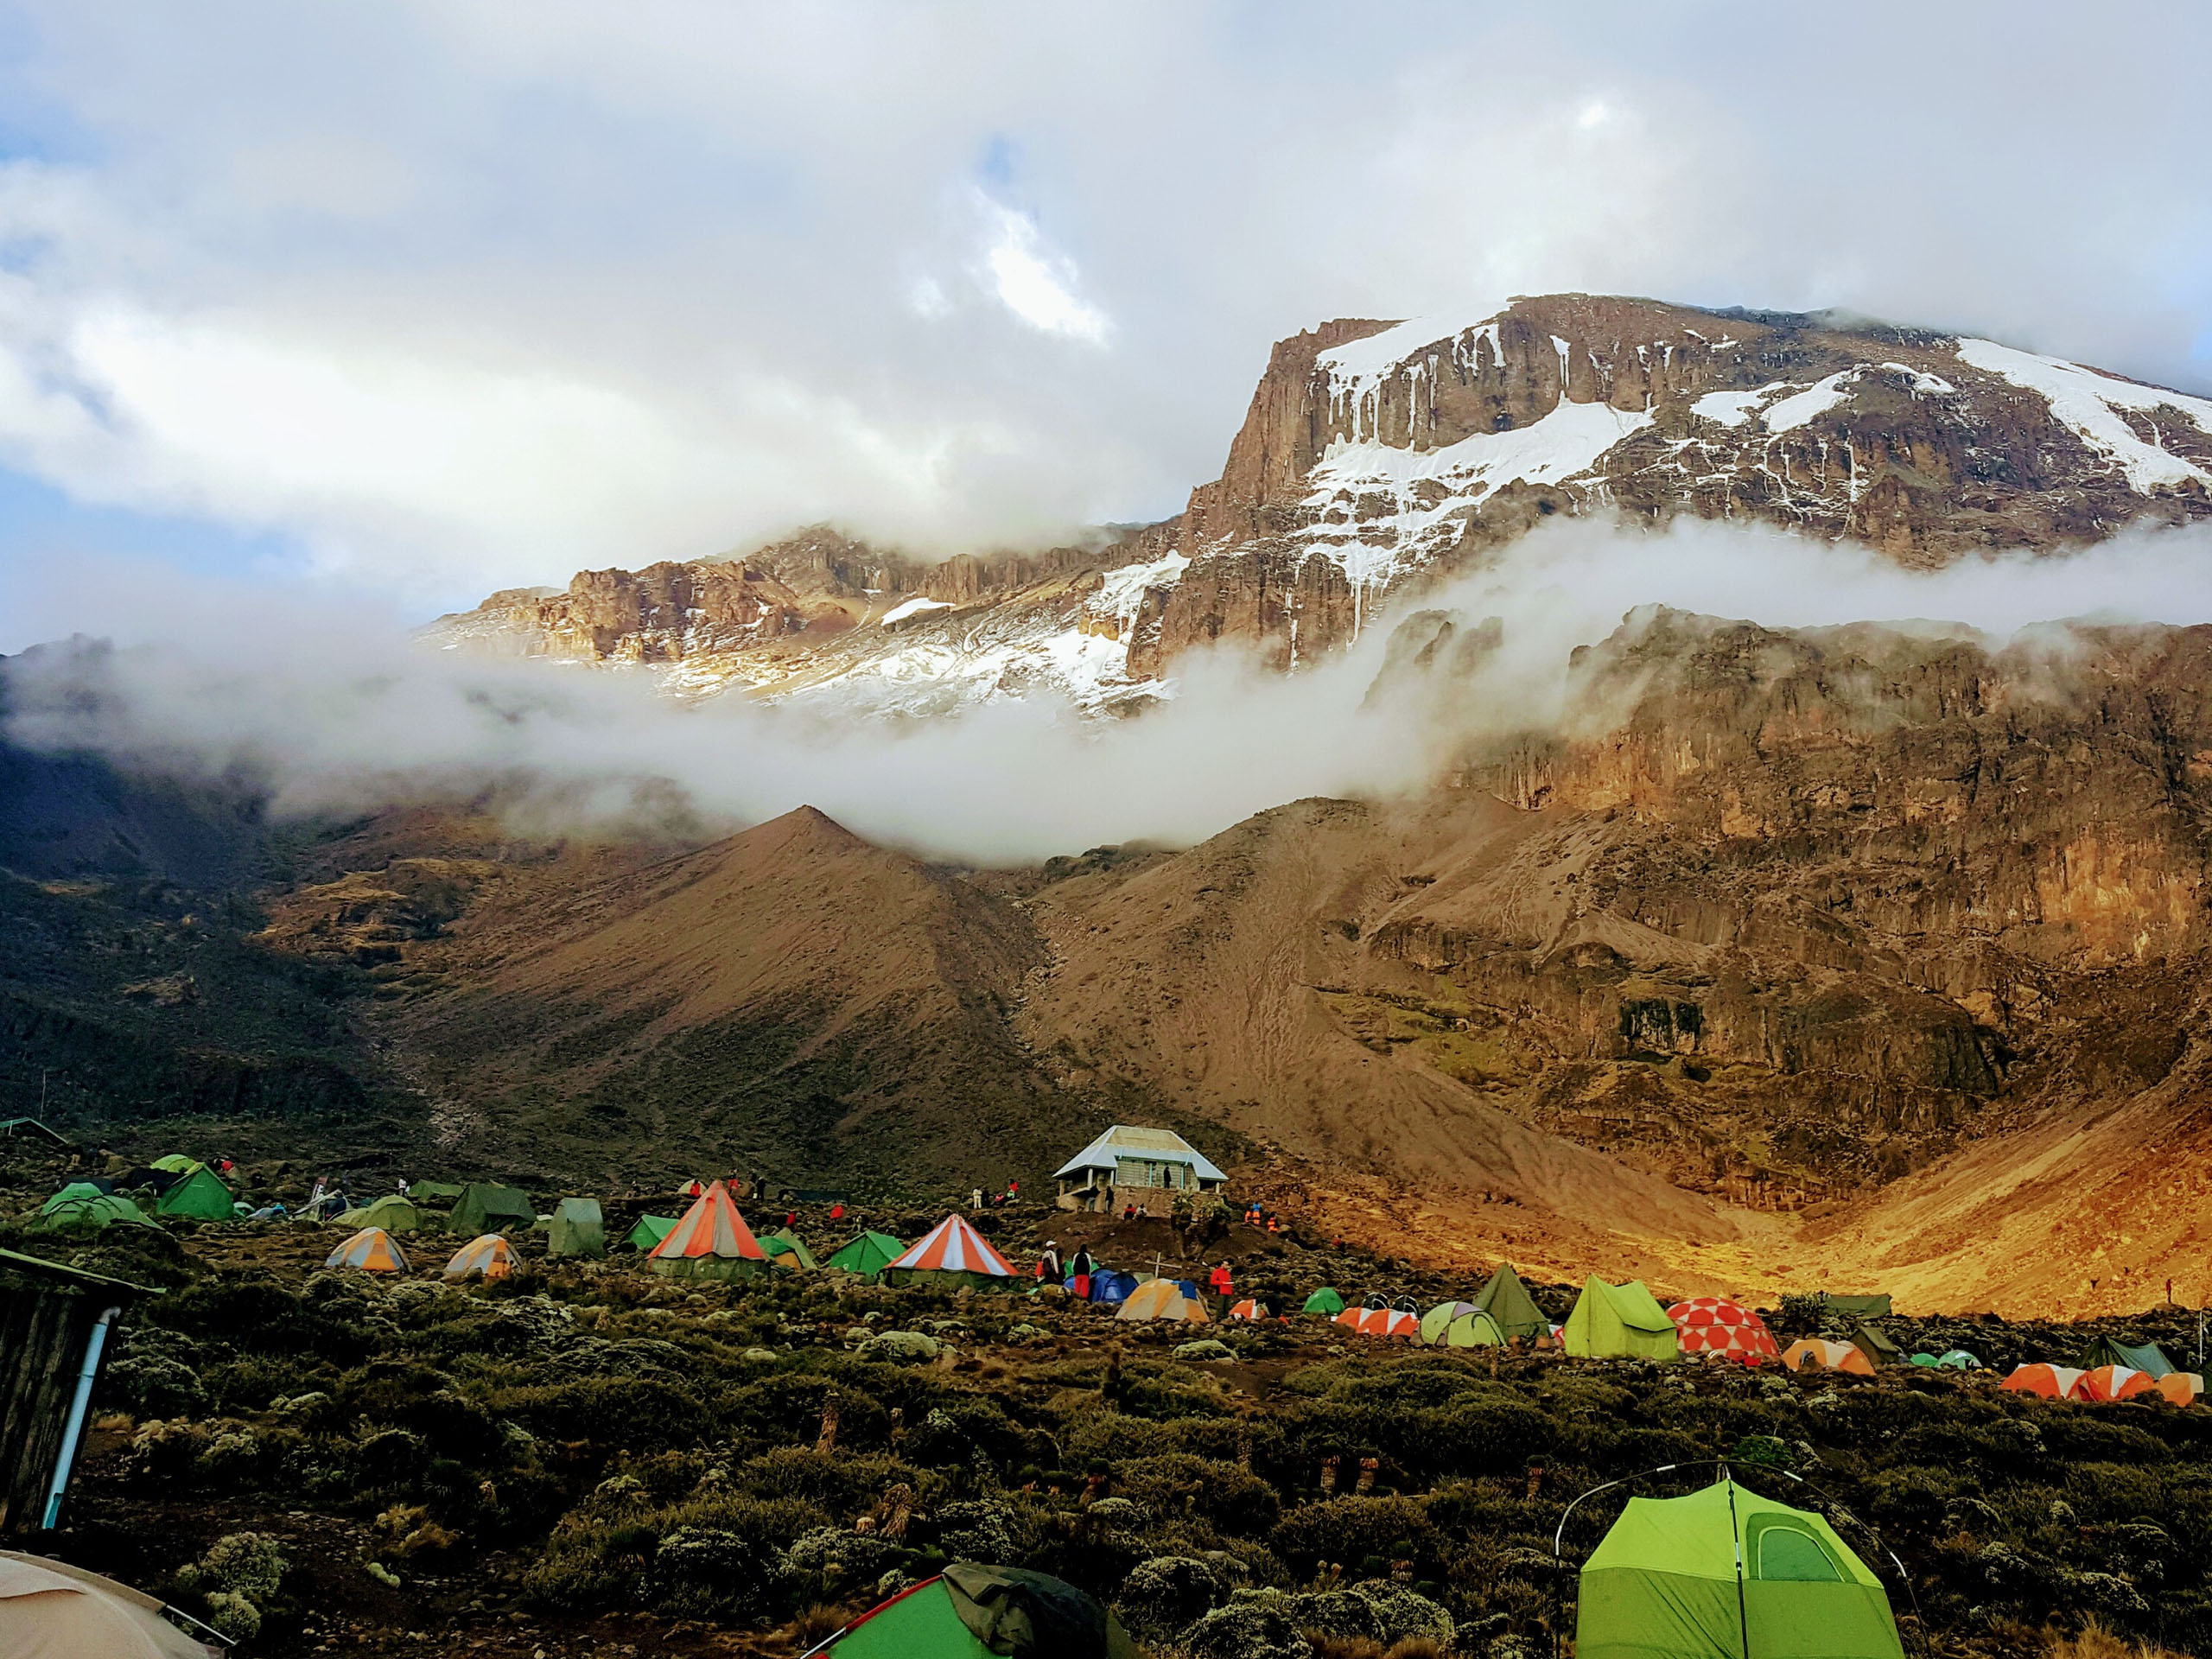 Machame Route - the most popular route